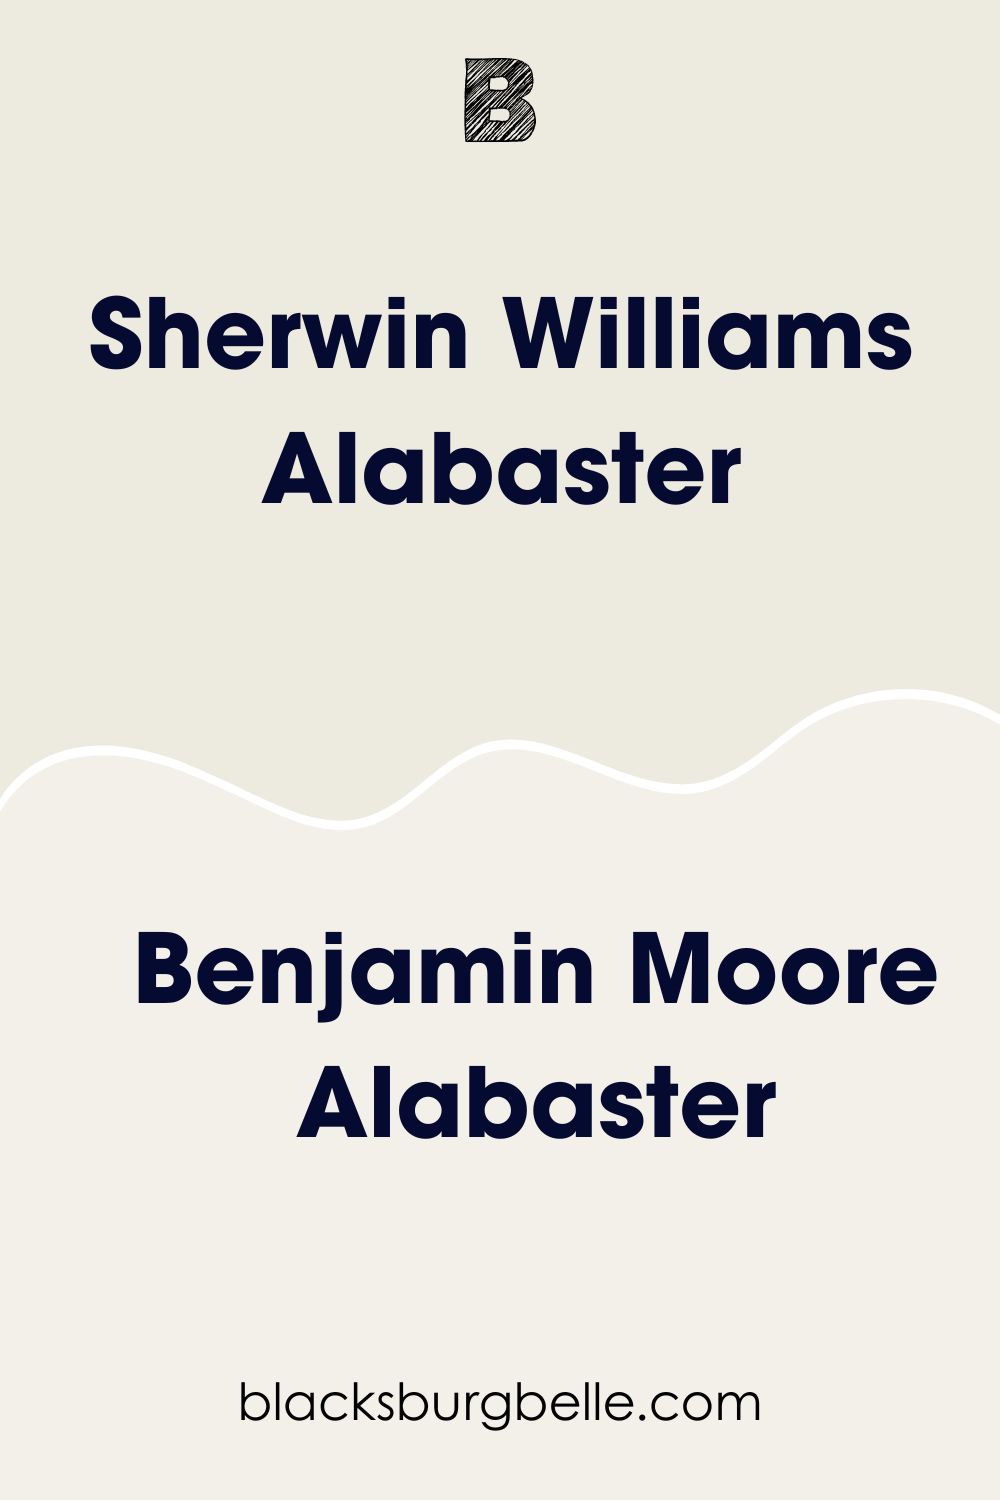 Does Benjamin Moore Have an Equivalent of Sherwin Williams Alabaster